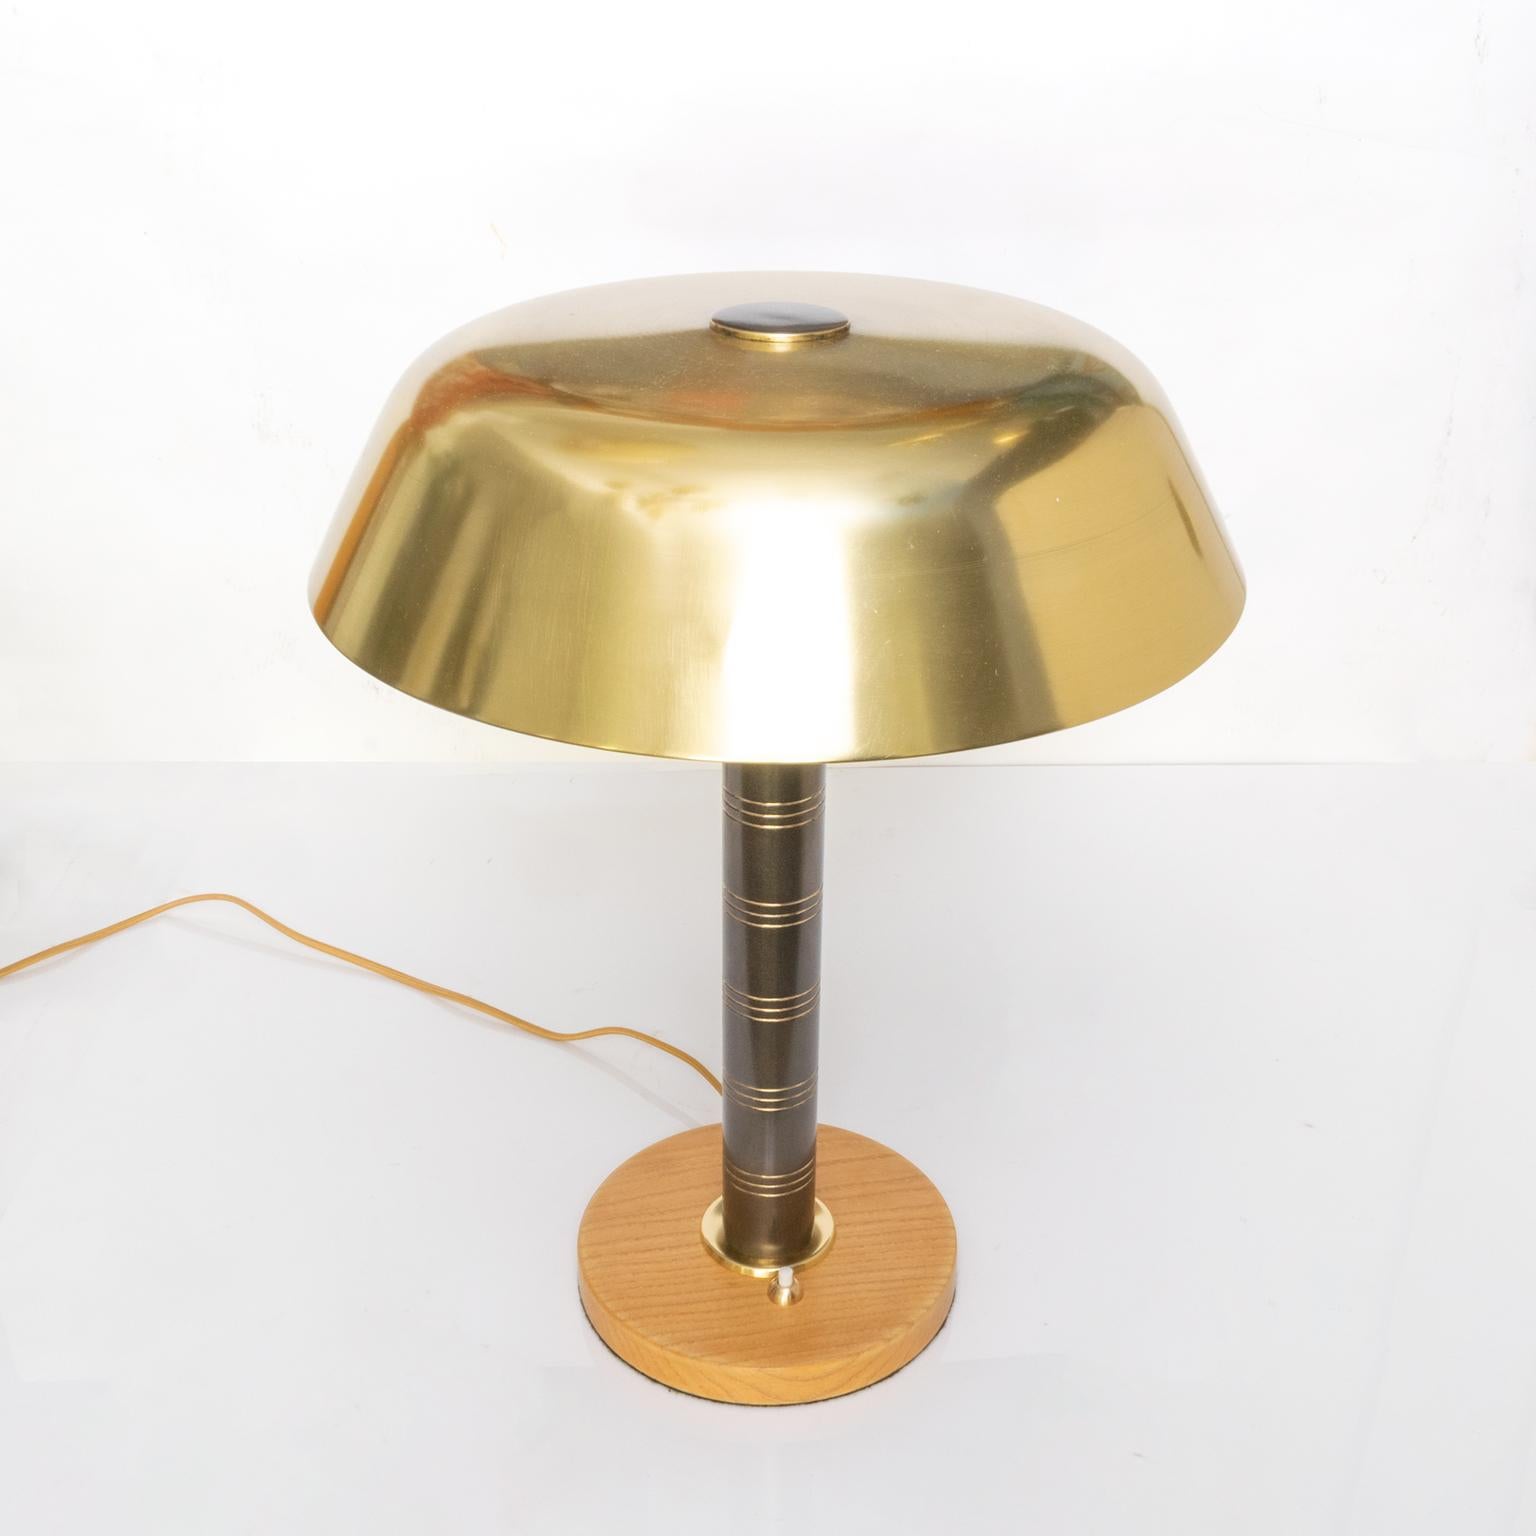 Lacquered Bohlmarks Scandinavian Modern Brass and Wood Lamp